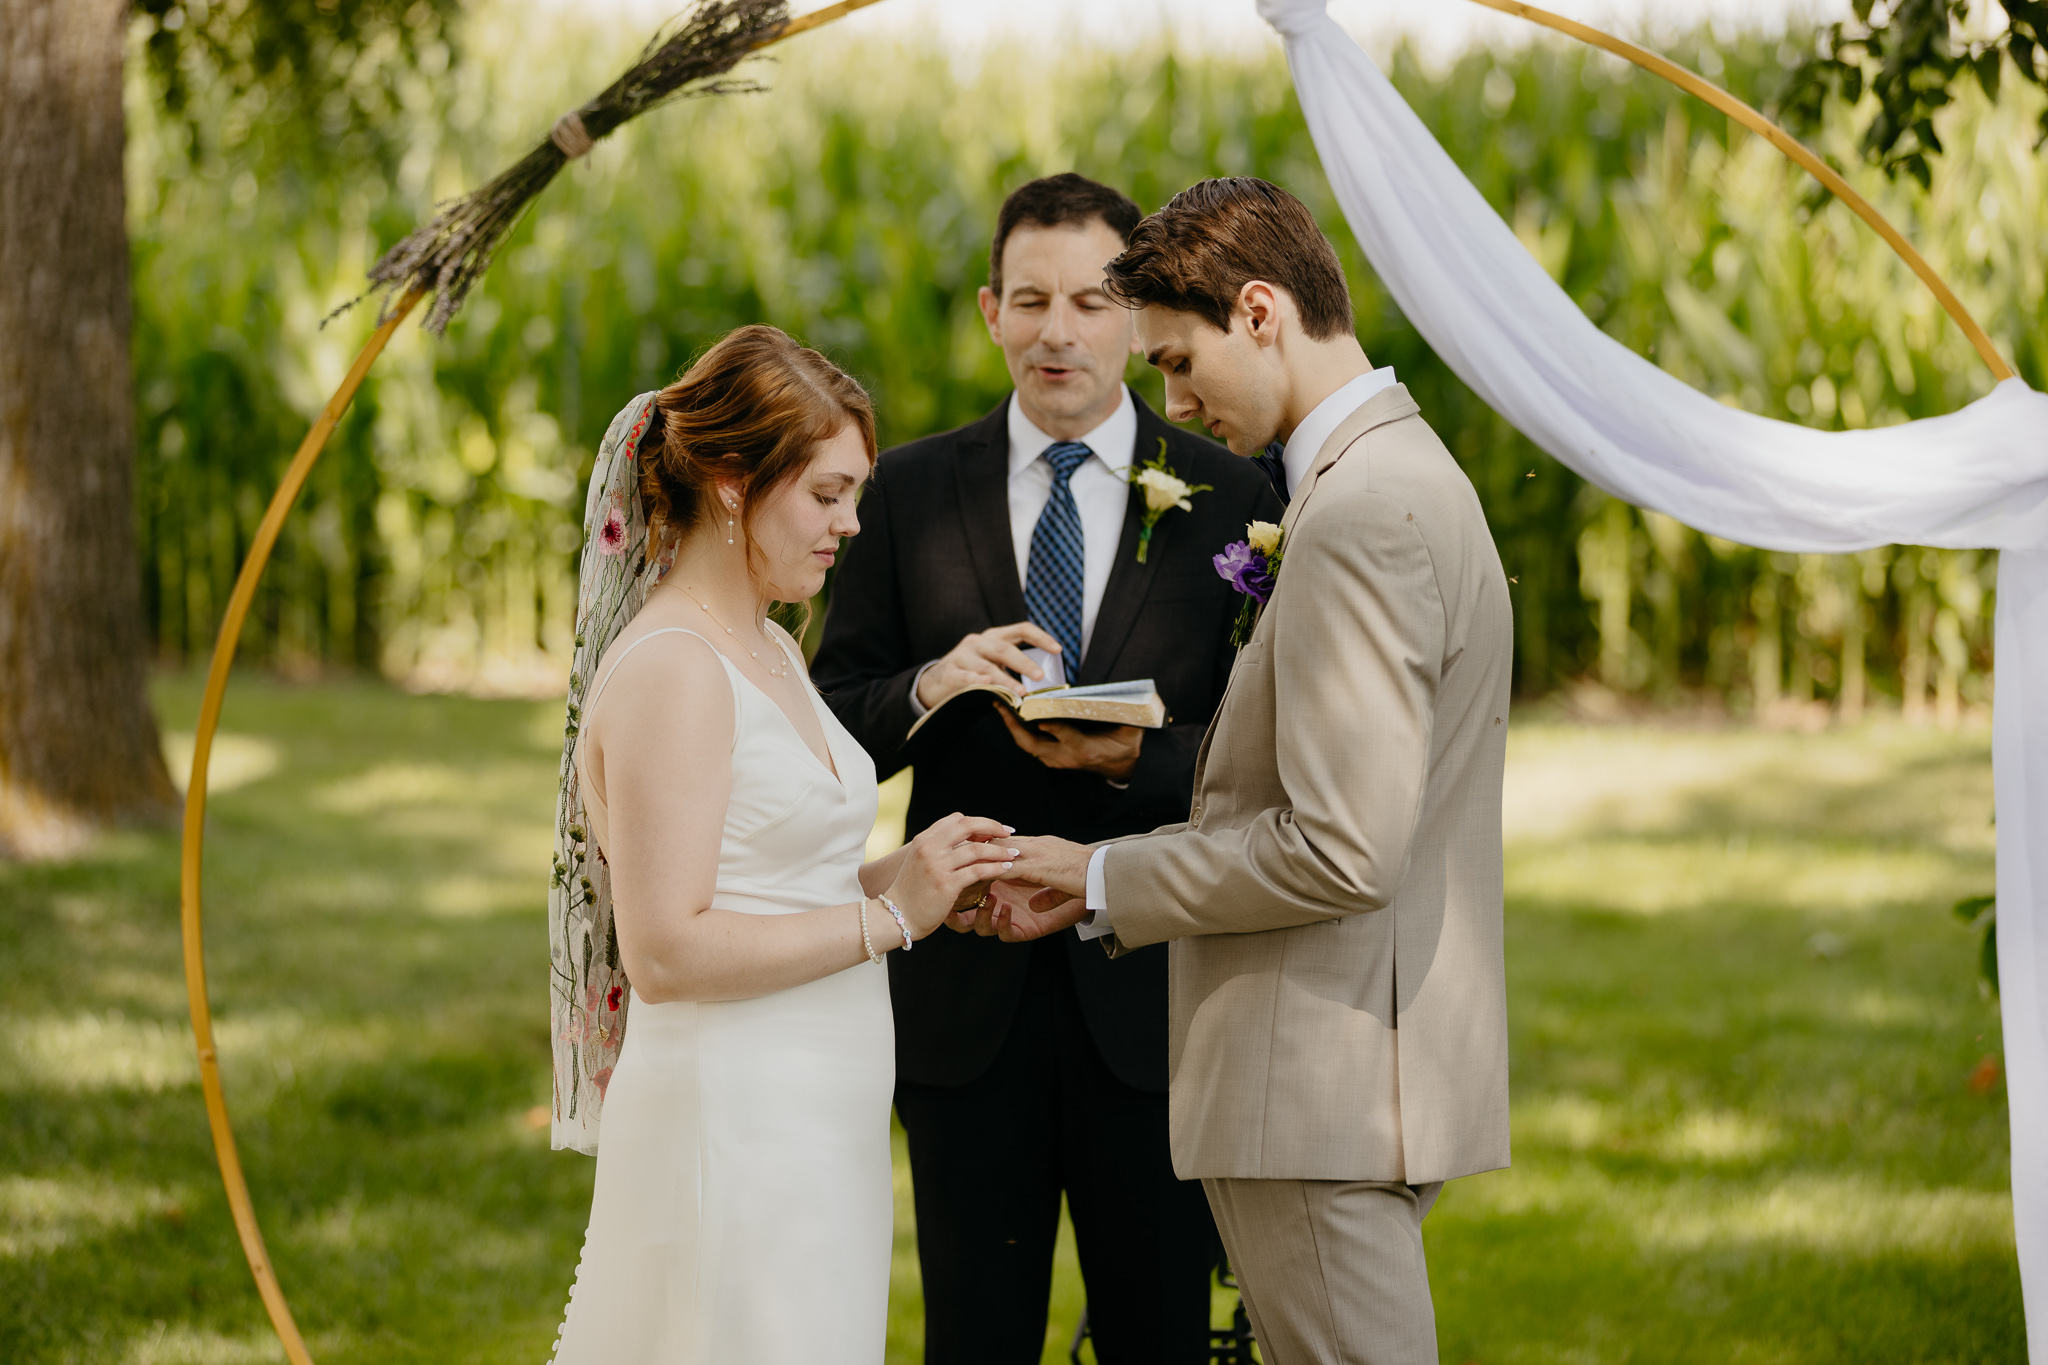 Intimate Indiana Outdoor Wedding in Summer // Ceremony, Vows, and Exchanging Rings